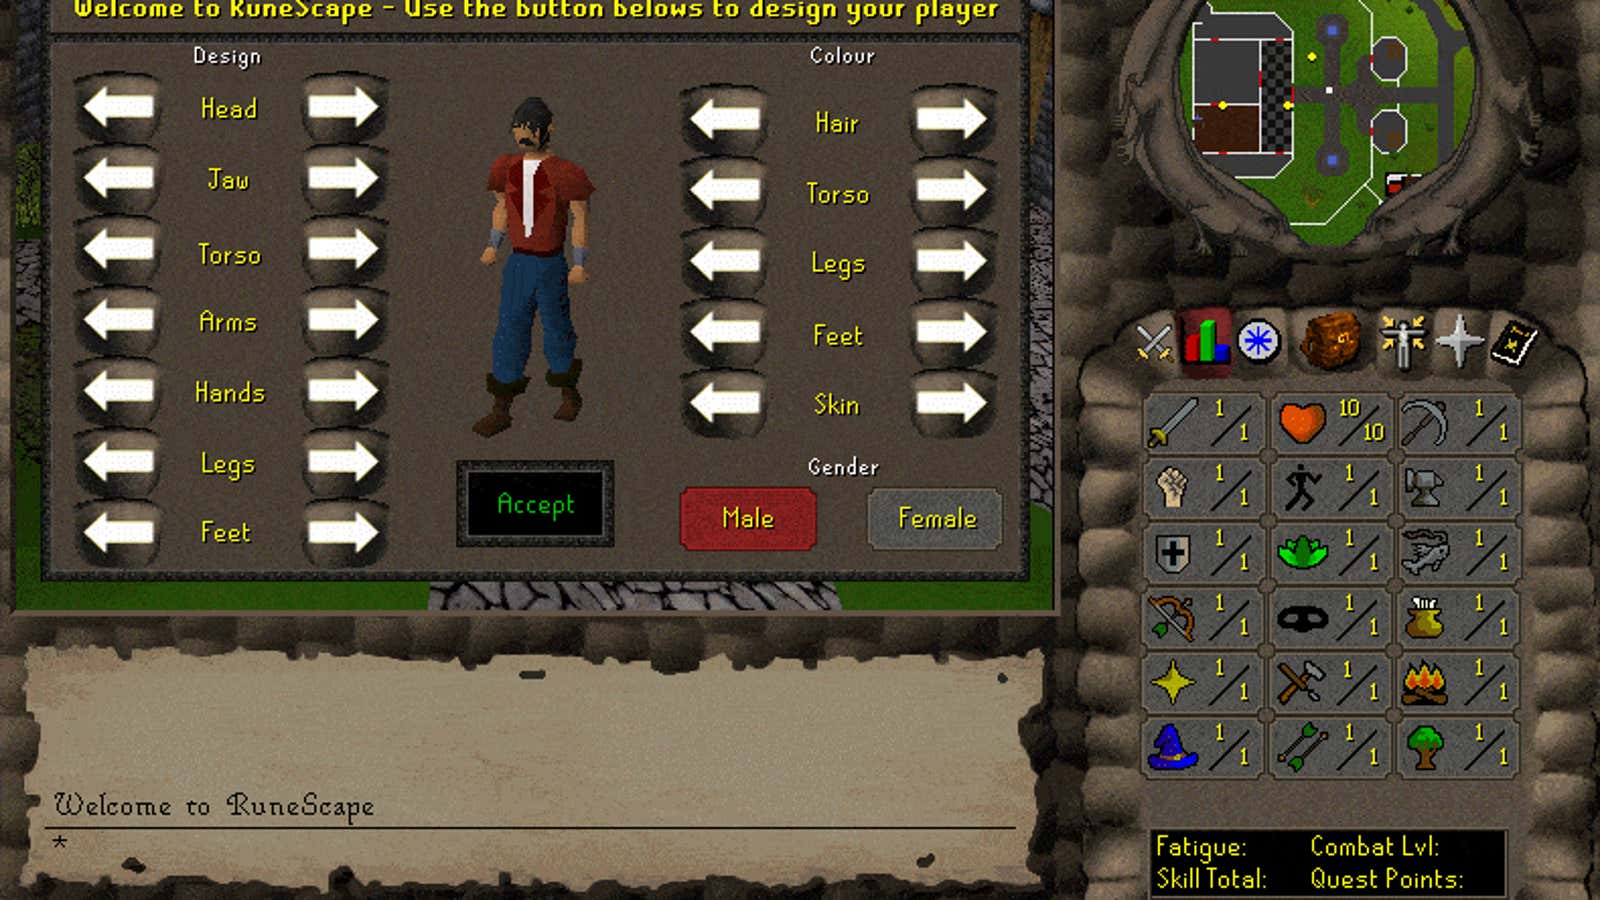 What made you choose RuneScape instead of osrs. Or do you play